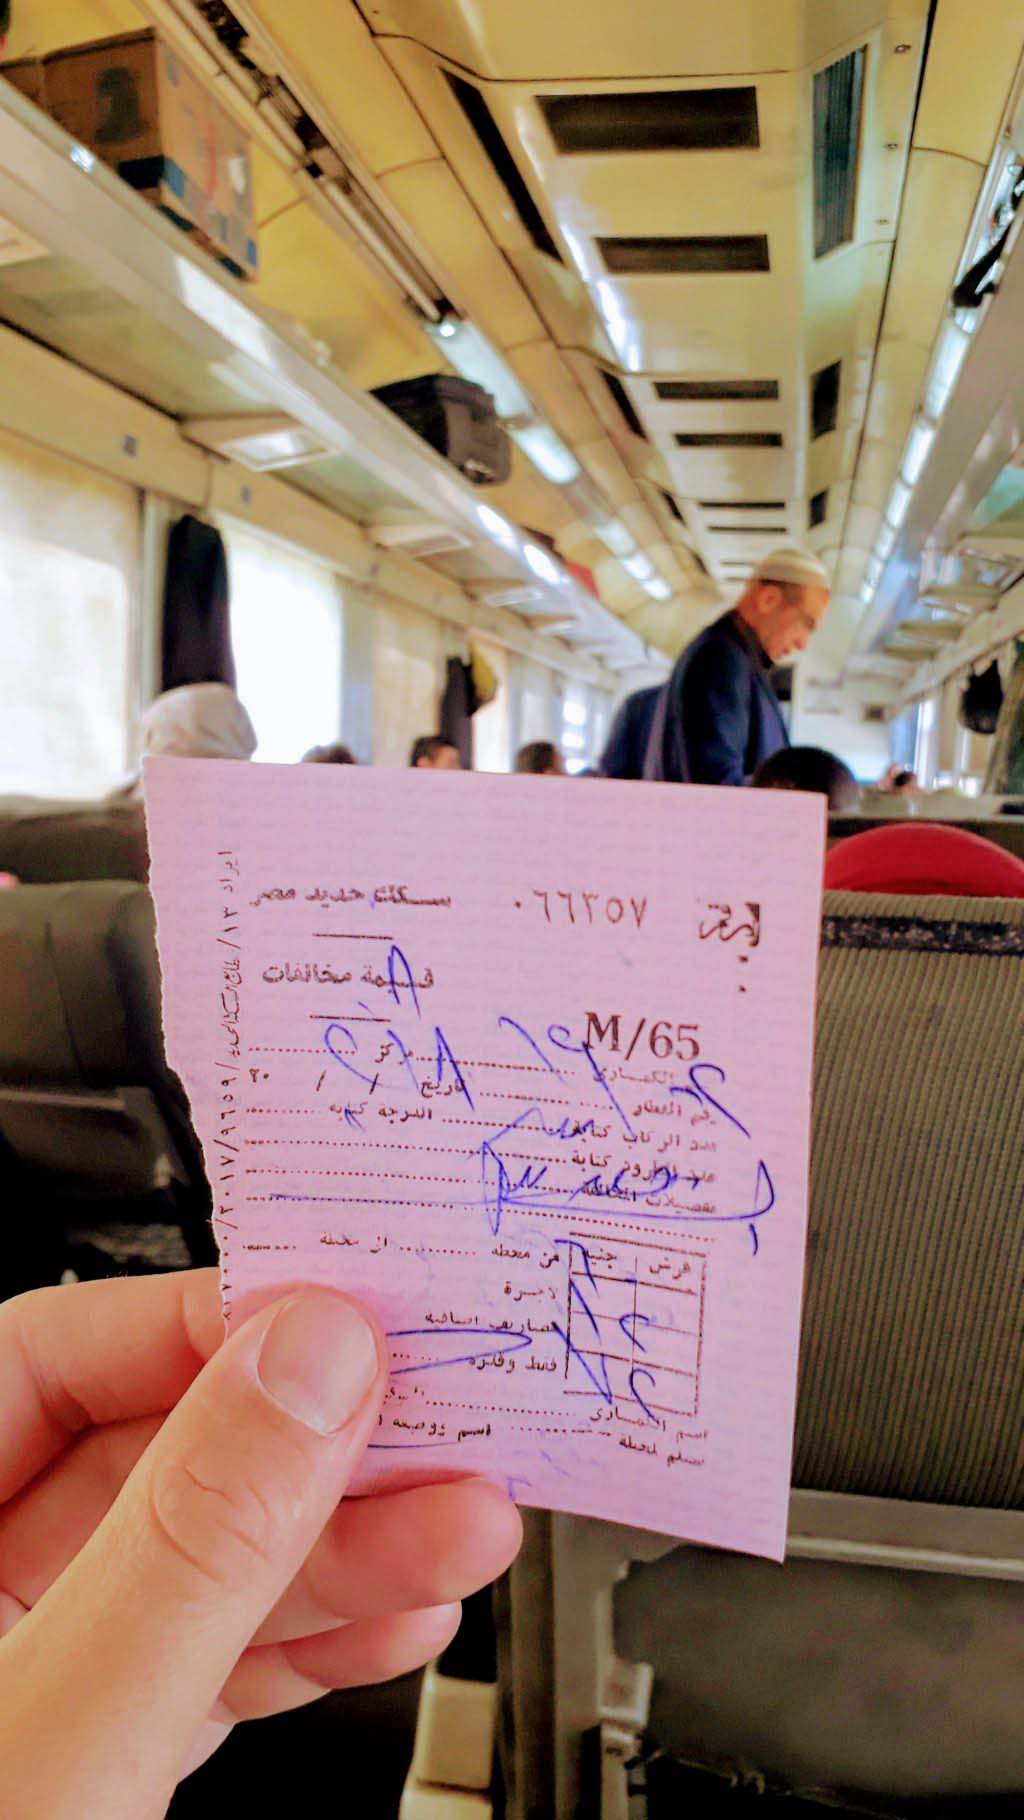 Ticket on the train to Aswan